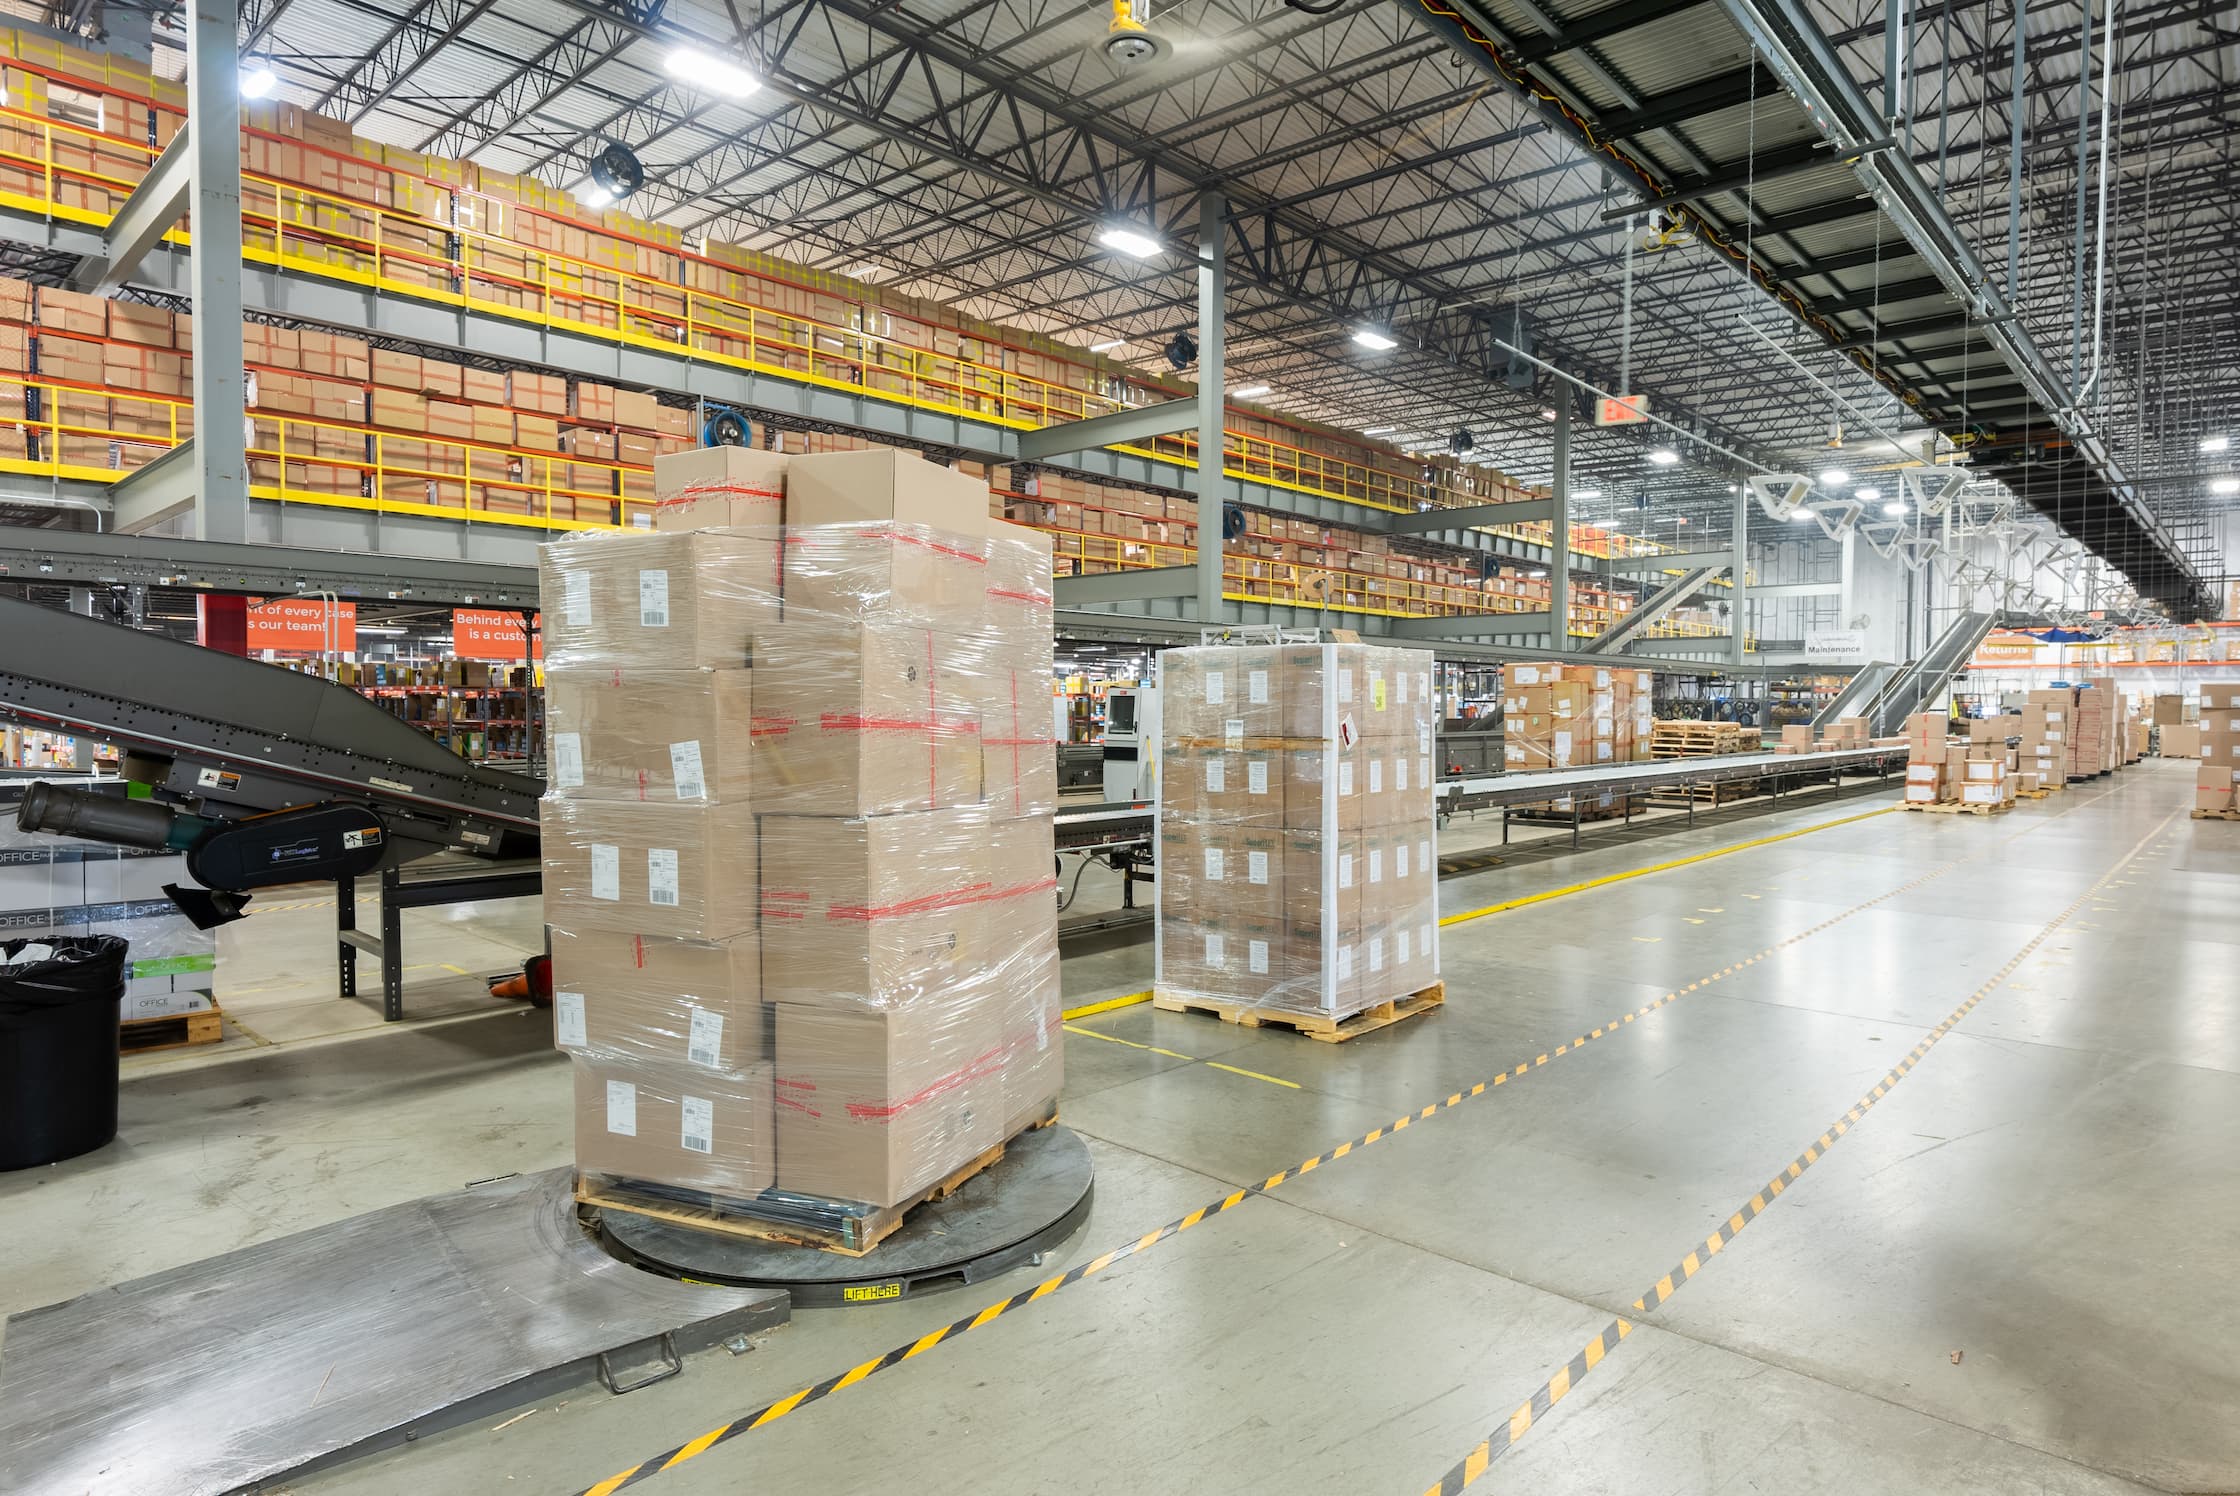 Retail Compliance for Food & Beverage Distribution